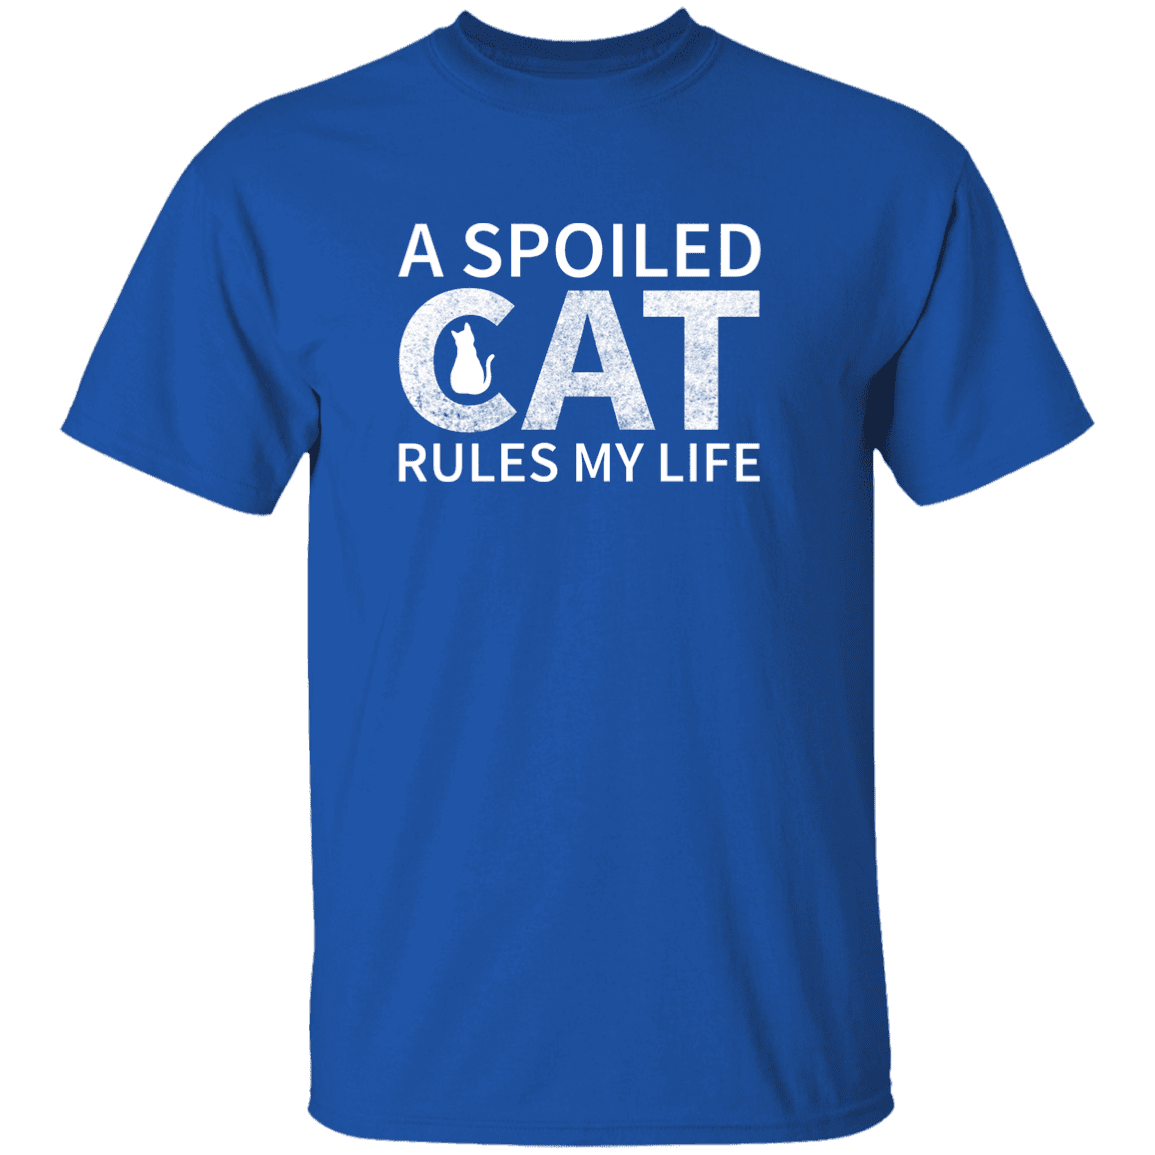 A Spoiled Cat Rules My Life - T Shirt.